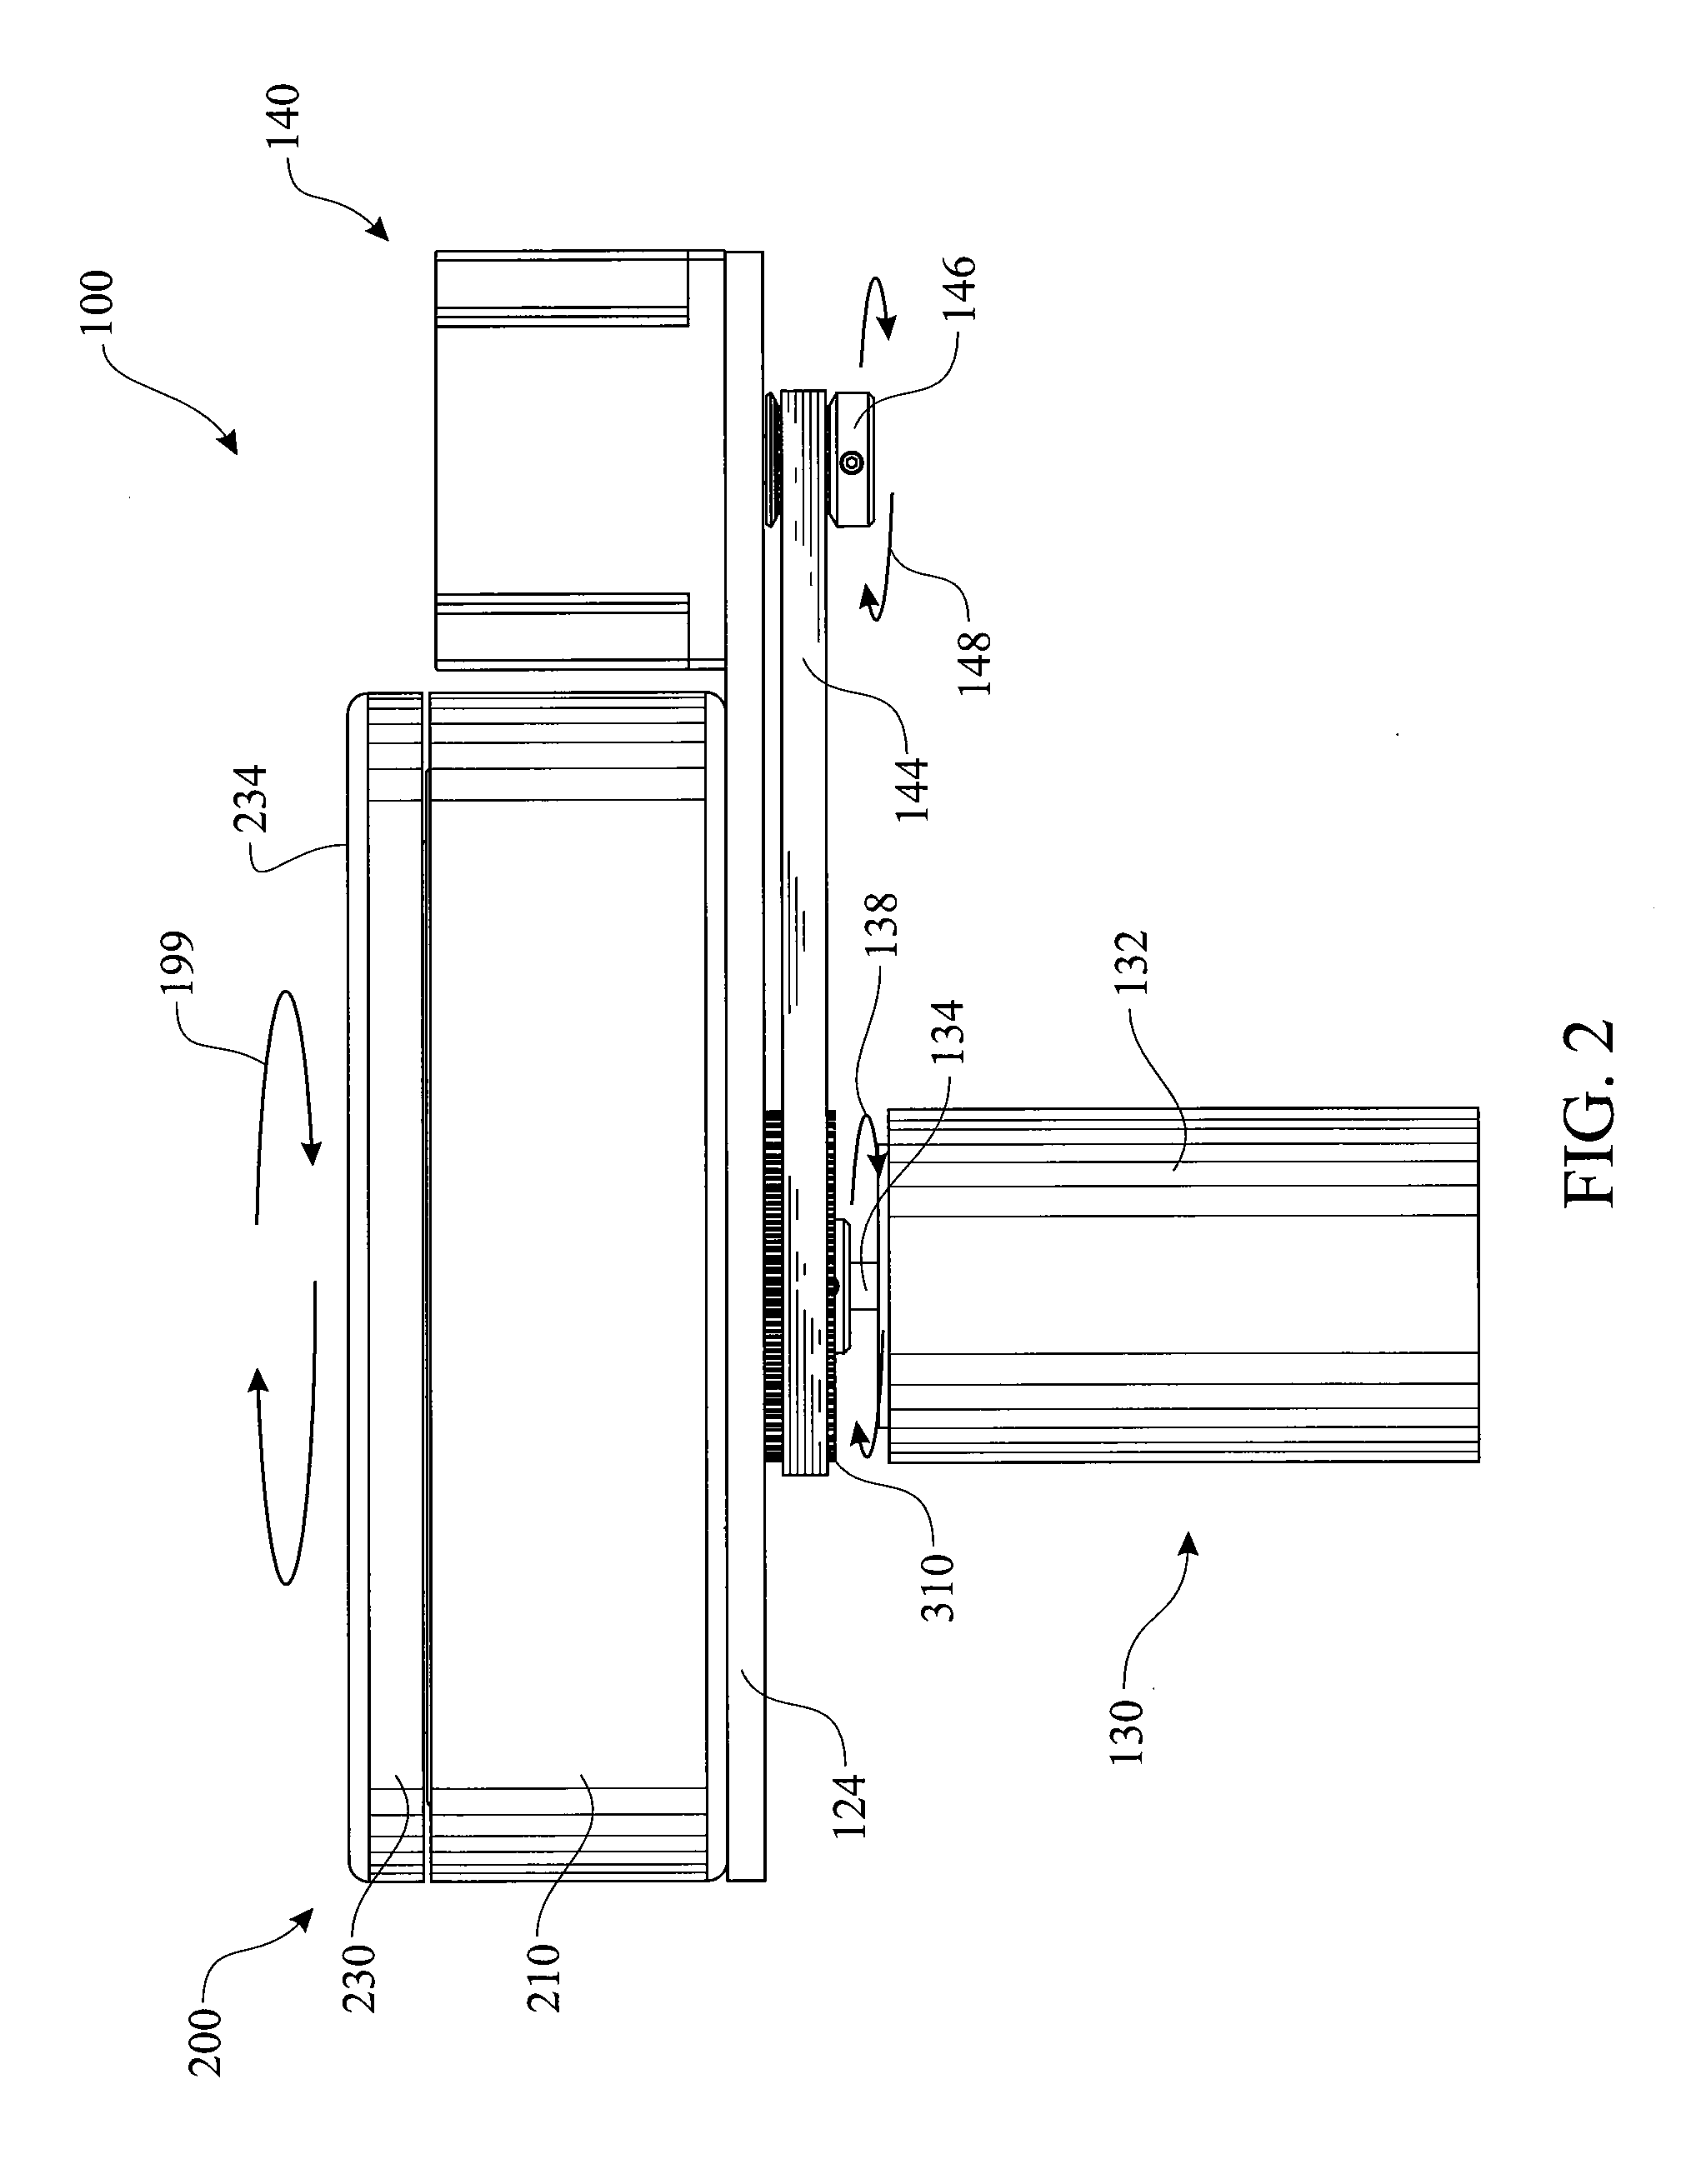 Coaxially arranged reduction gear assembly